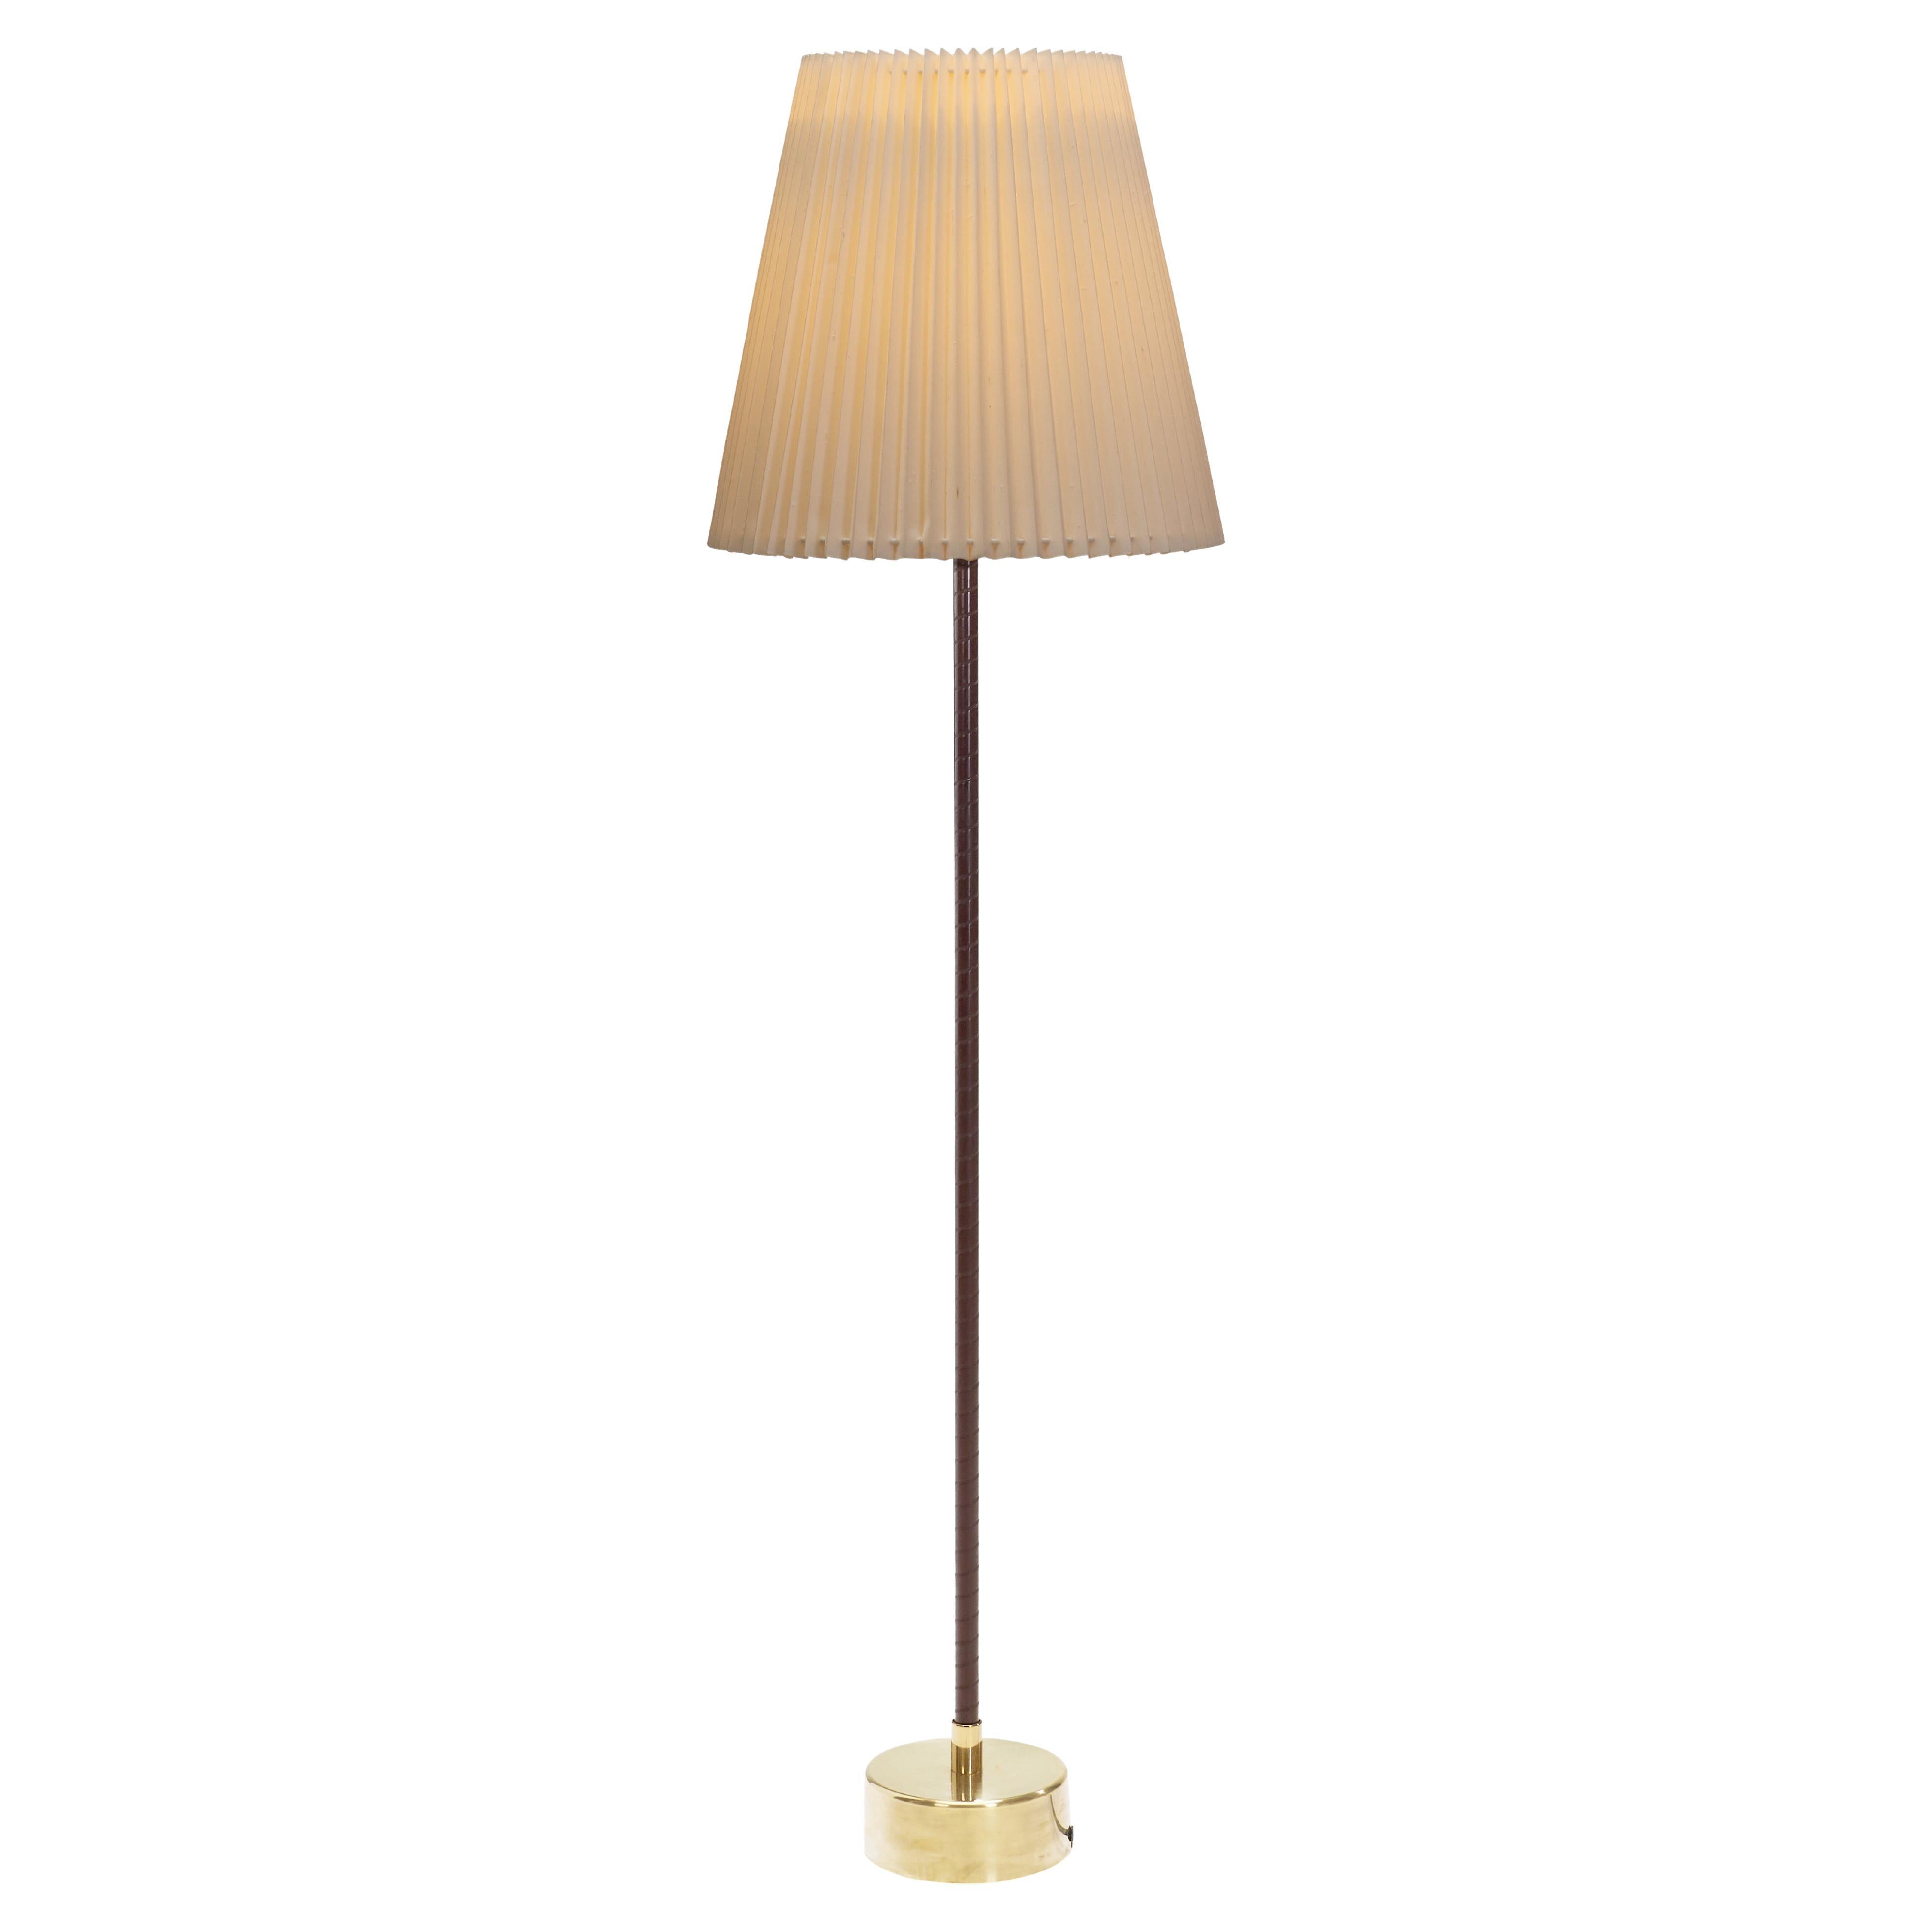 Lisa Johansson-Pape Brass Floor Lamp for Stockmann Orno, Finland 1950s For Sale